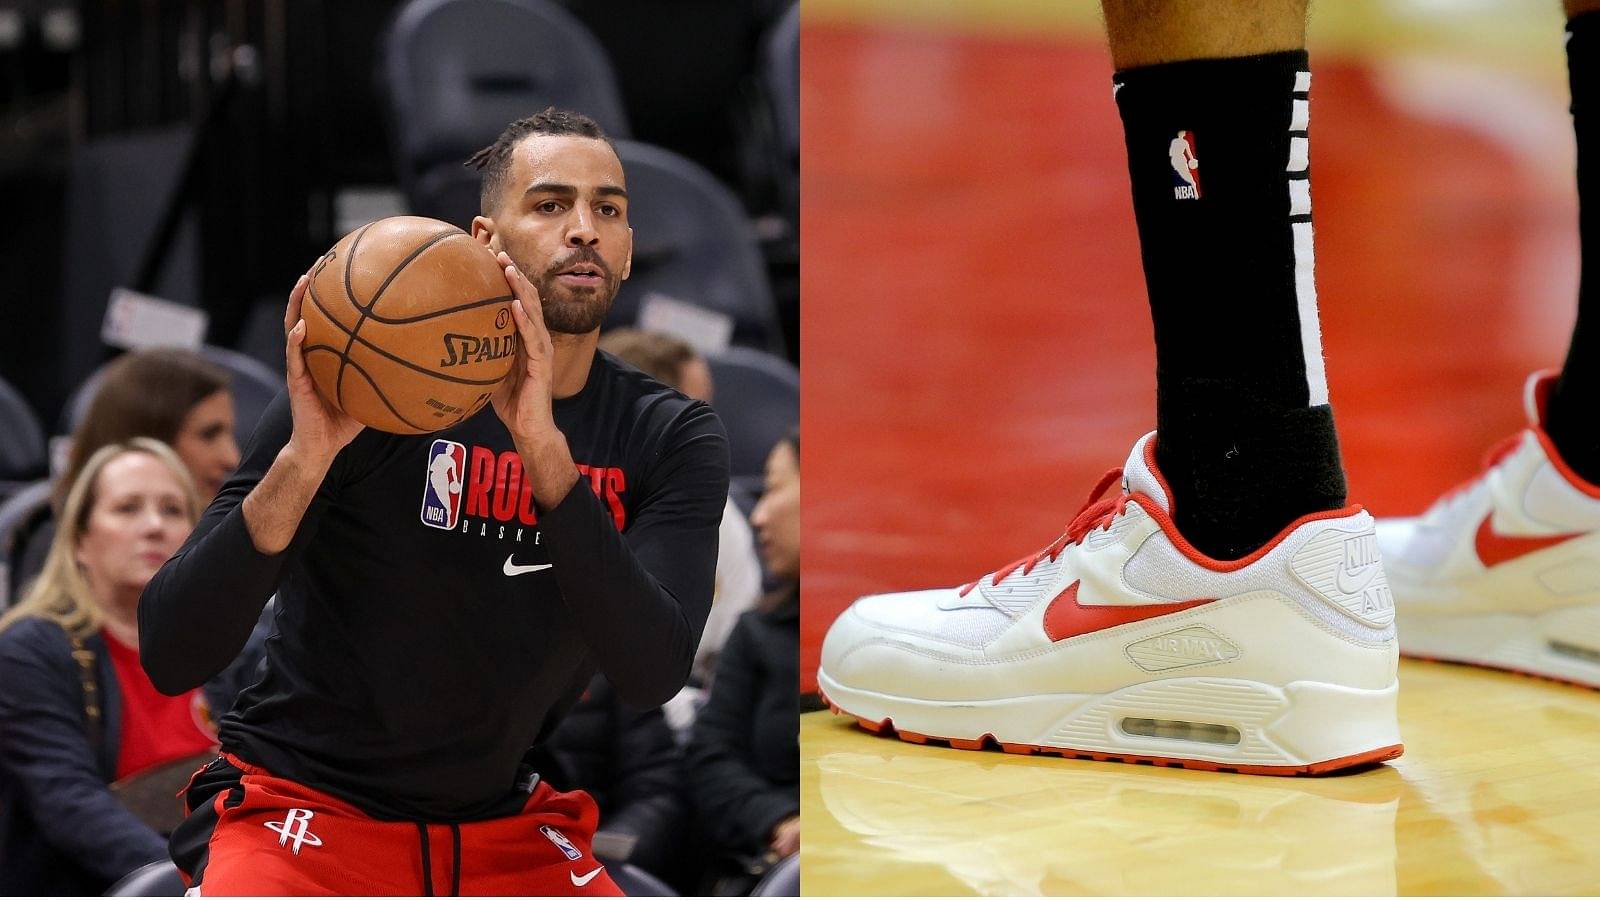 "Thabo Sefolosha, the only player to ever play in Air Max 90s": How the best Swiss basketball player of all-time had a special taste for sneakers